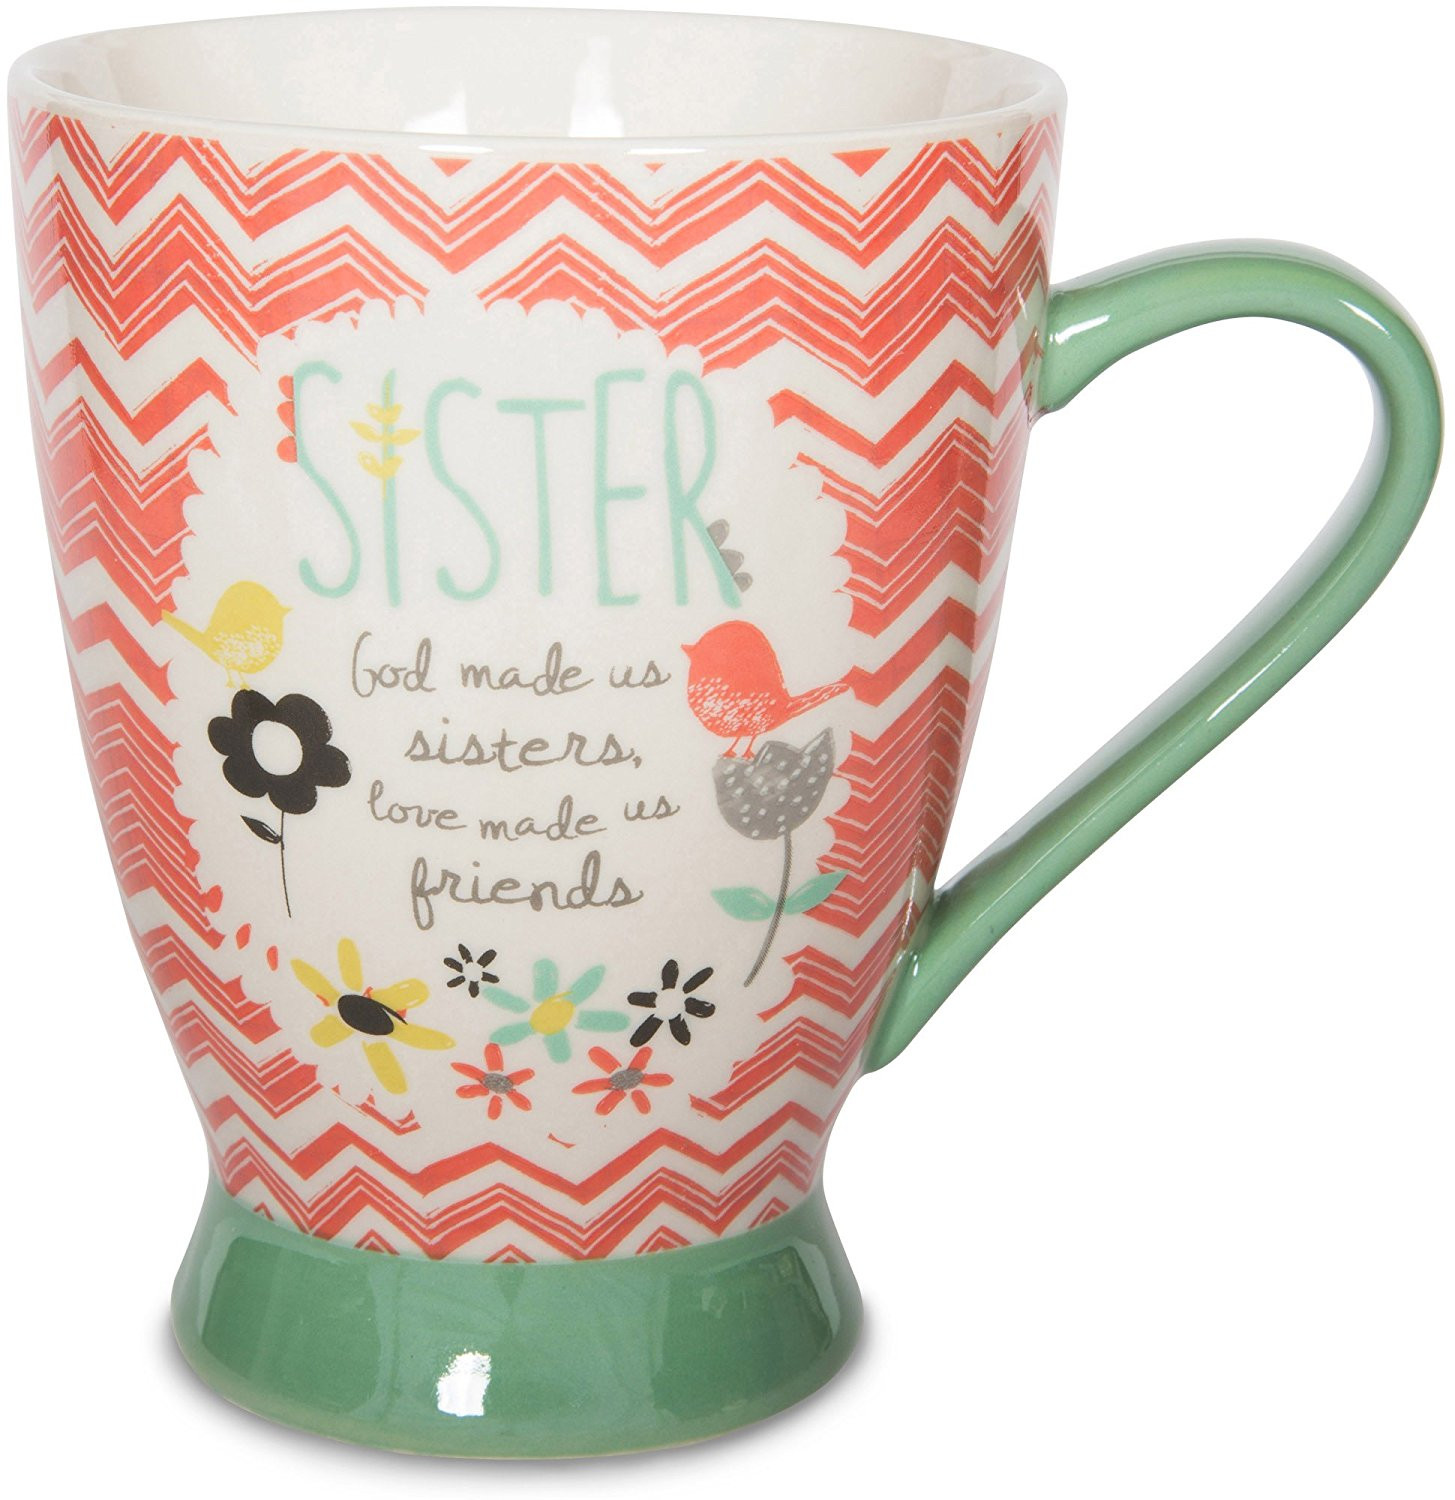 Best Gift Ideas For Sister
 105 Perfect Birthday Gift Ideas for Sister